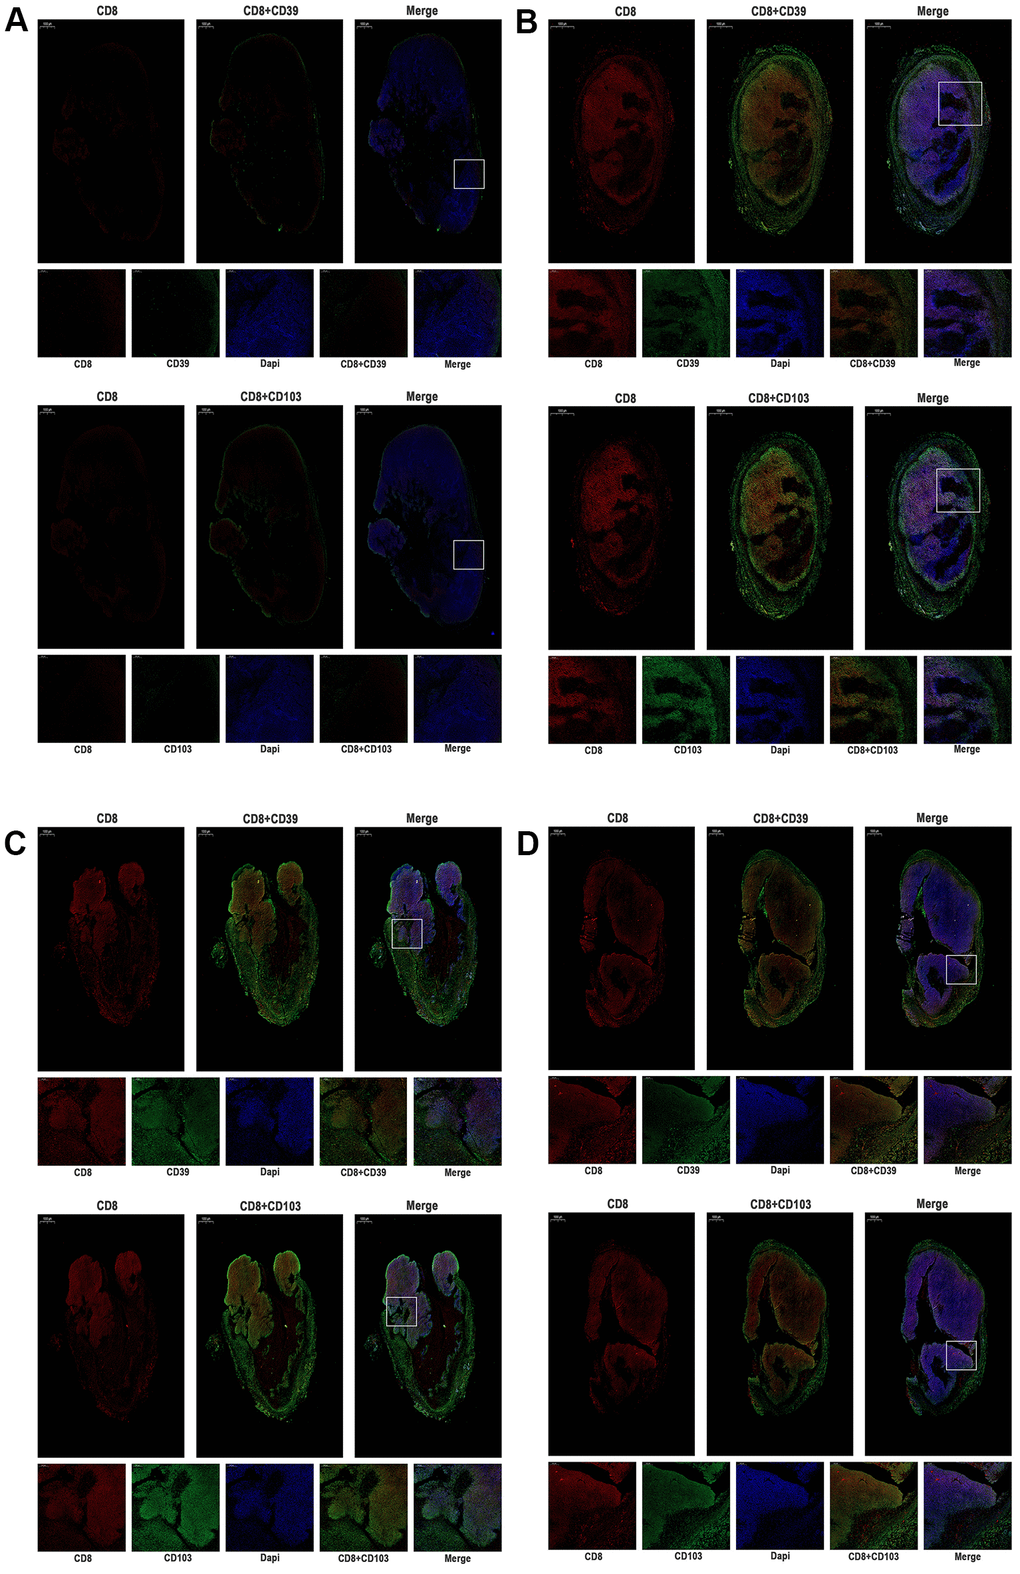 The expression of CD39, CD103, and CD8 were tested by immunofluorescence of MC38 tumors (n=3, Scale bar=1000 μm). (A) MC38-hPD-L1 control (B) MC38-hPD-L1 (C) MC38-hPD-L1/KO (D) MC38-KO CD8 was indicated by red signals; CD39 or CD103 was indicated by green signals; nuclei, blue 4’,6-diamidino-2-phenylindole (DAPI) signals. Local amplifies the area indicated by the white box. Scale bar=200 μm.